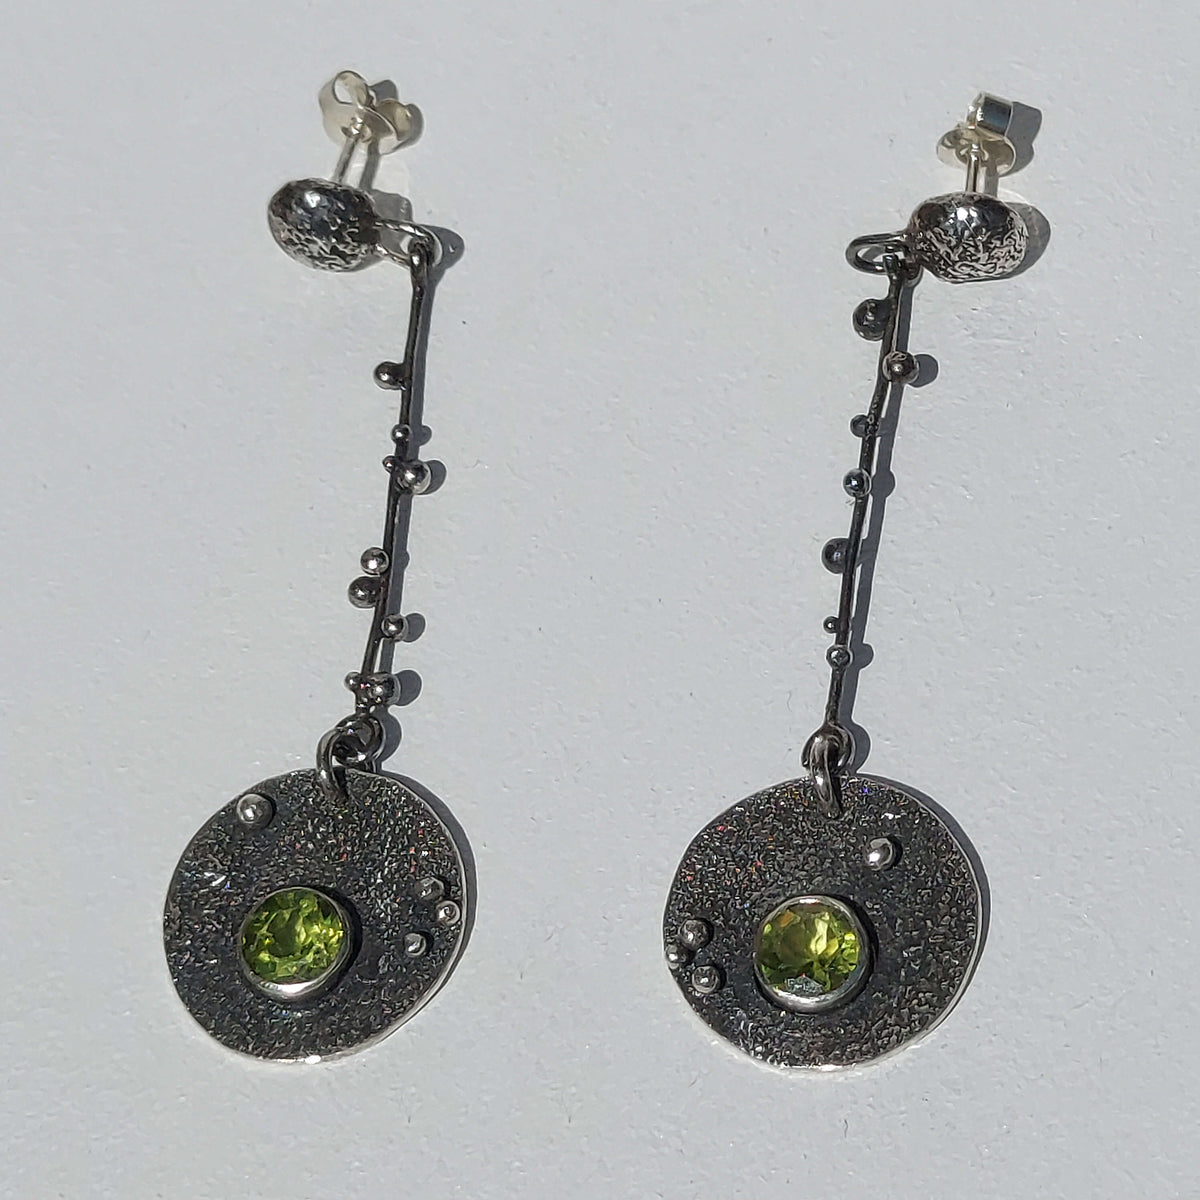 unusual dangle earrings with peridot, silver granules and texture, artisan made by roff jewellery